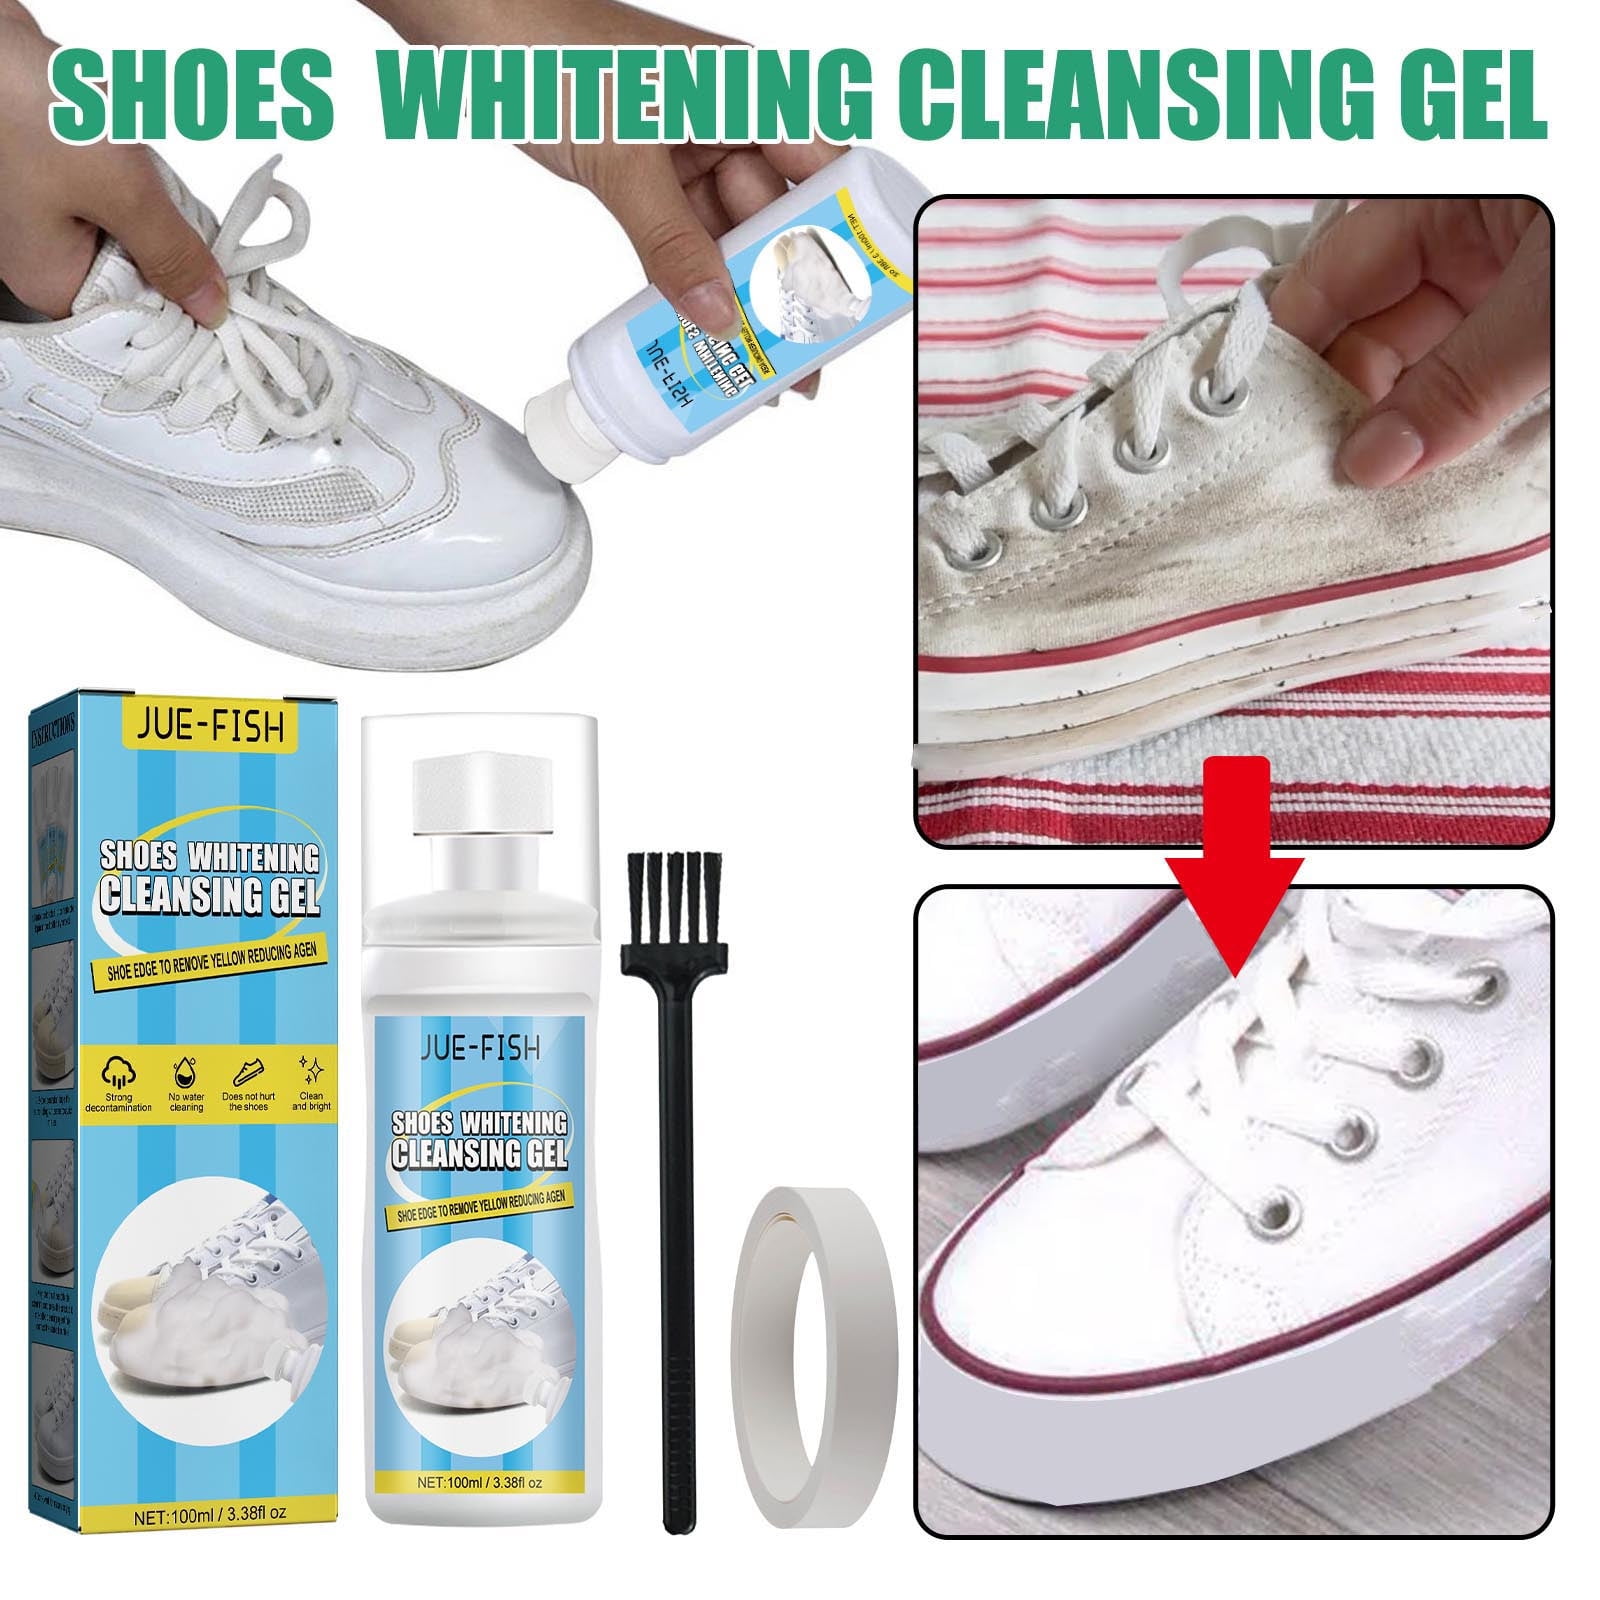 Shoe Cleaner Foam White Shoe Cleaner,Shoe Cleaner In Household Essentials  for Shoes, Boots, Handbags, Car Upholstery, Furniture- Removes Surface  Dirt, Grime, Salt and More From Finished Leathers 